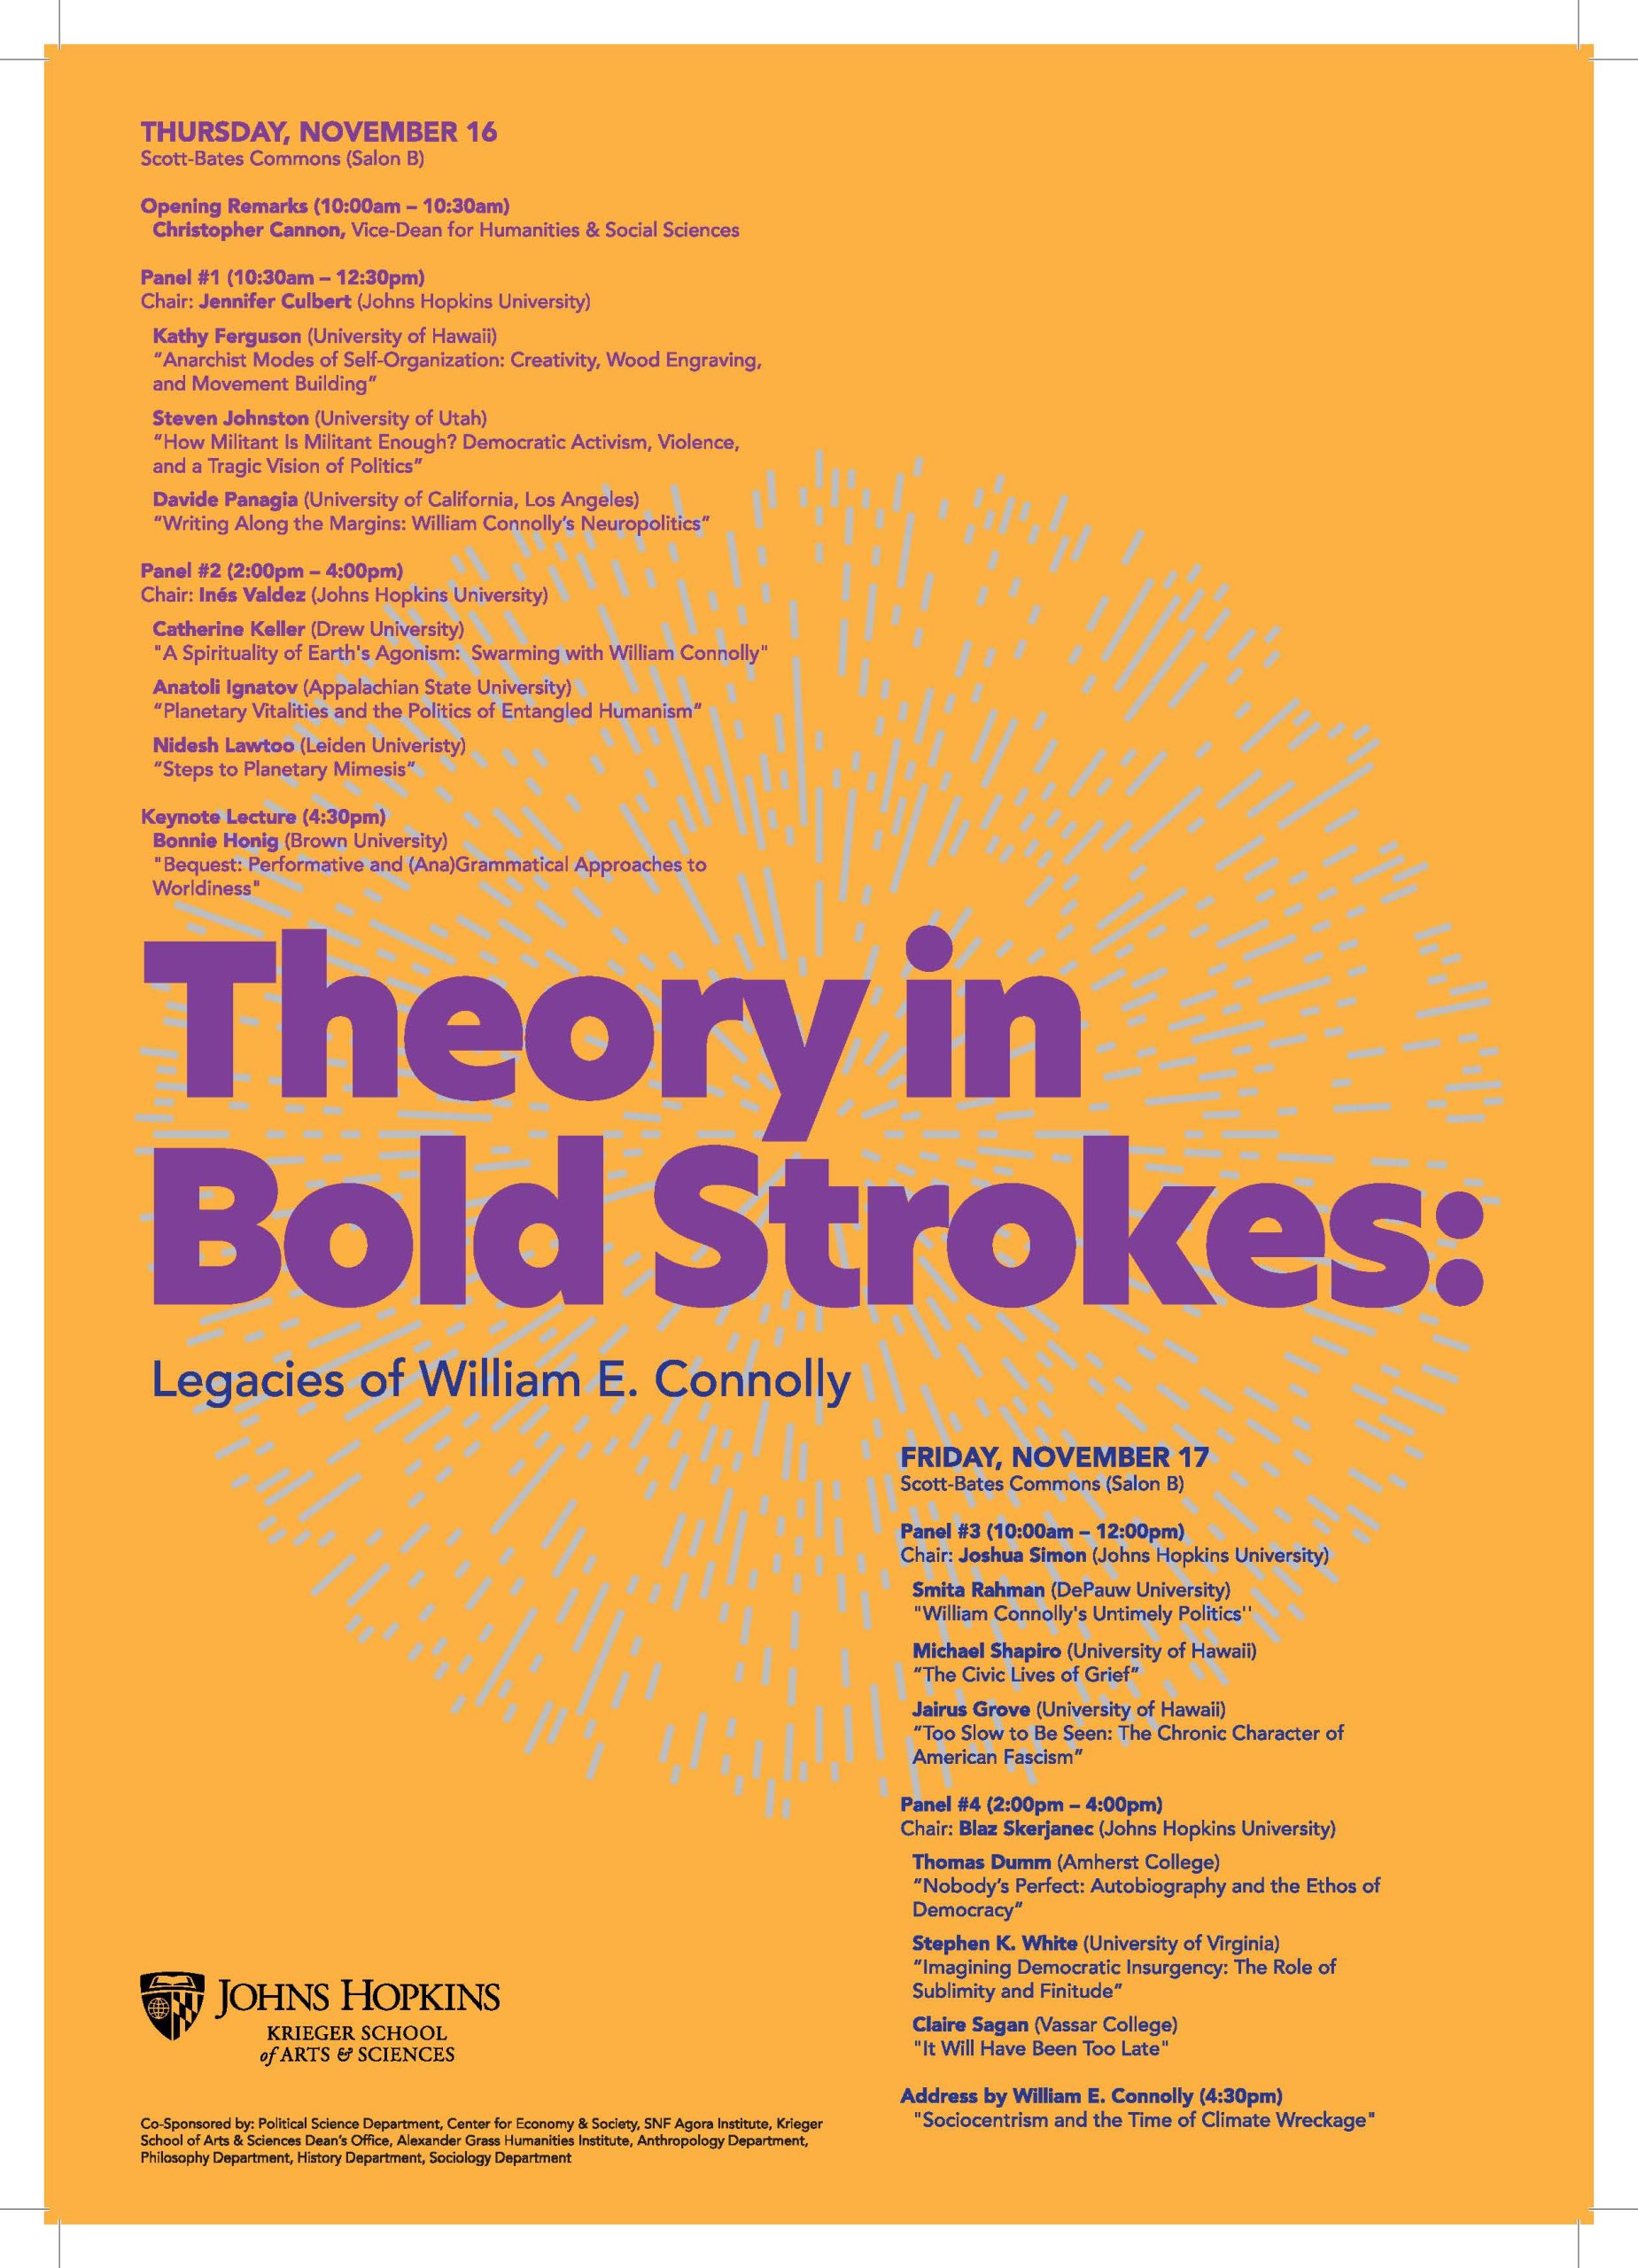 Poster for "Theory in Bold Strokes" symposium in celebration of Bill Connolly's retirement.